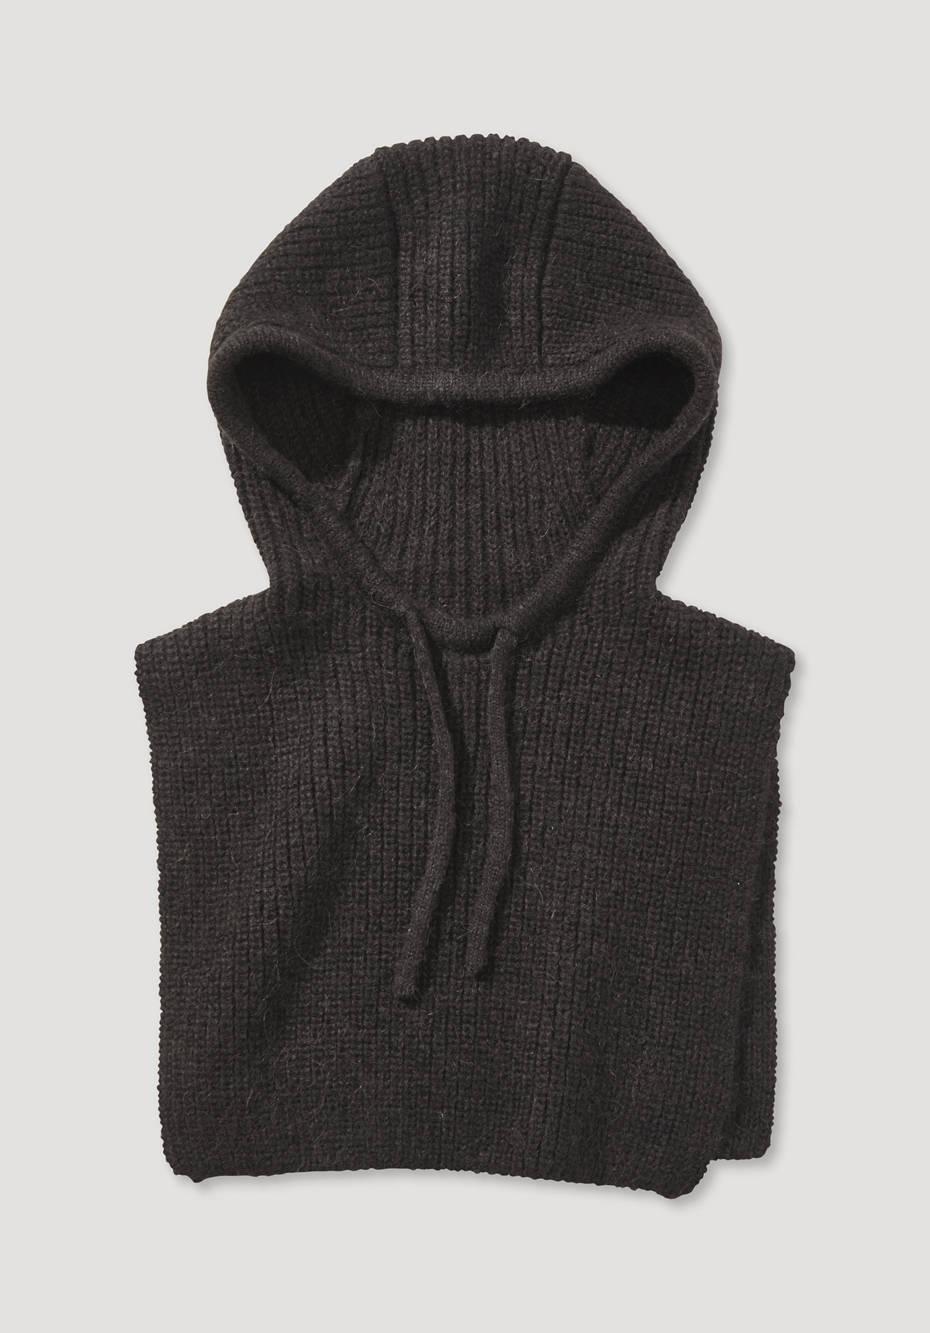 Hooded scarf made from pure alpaca